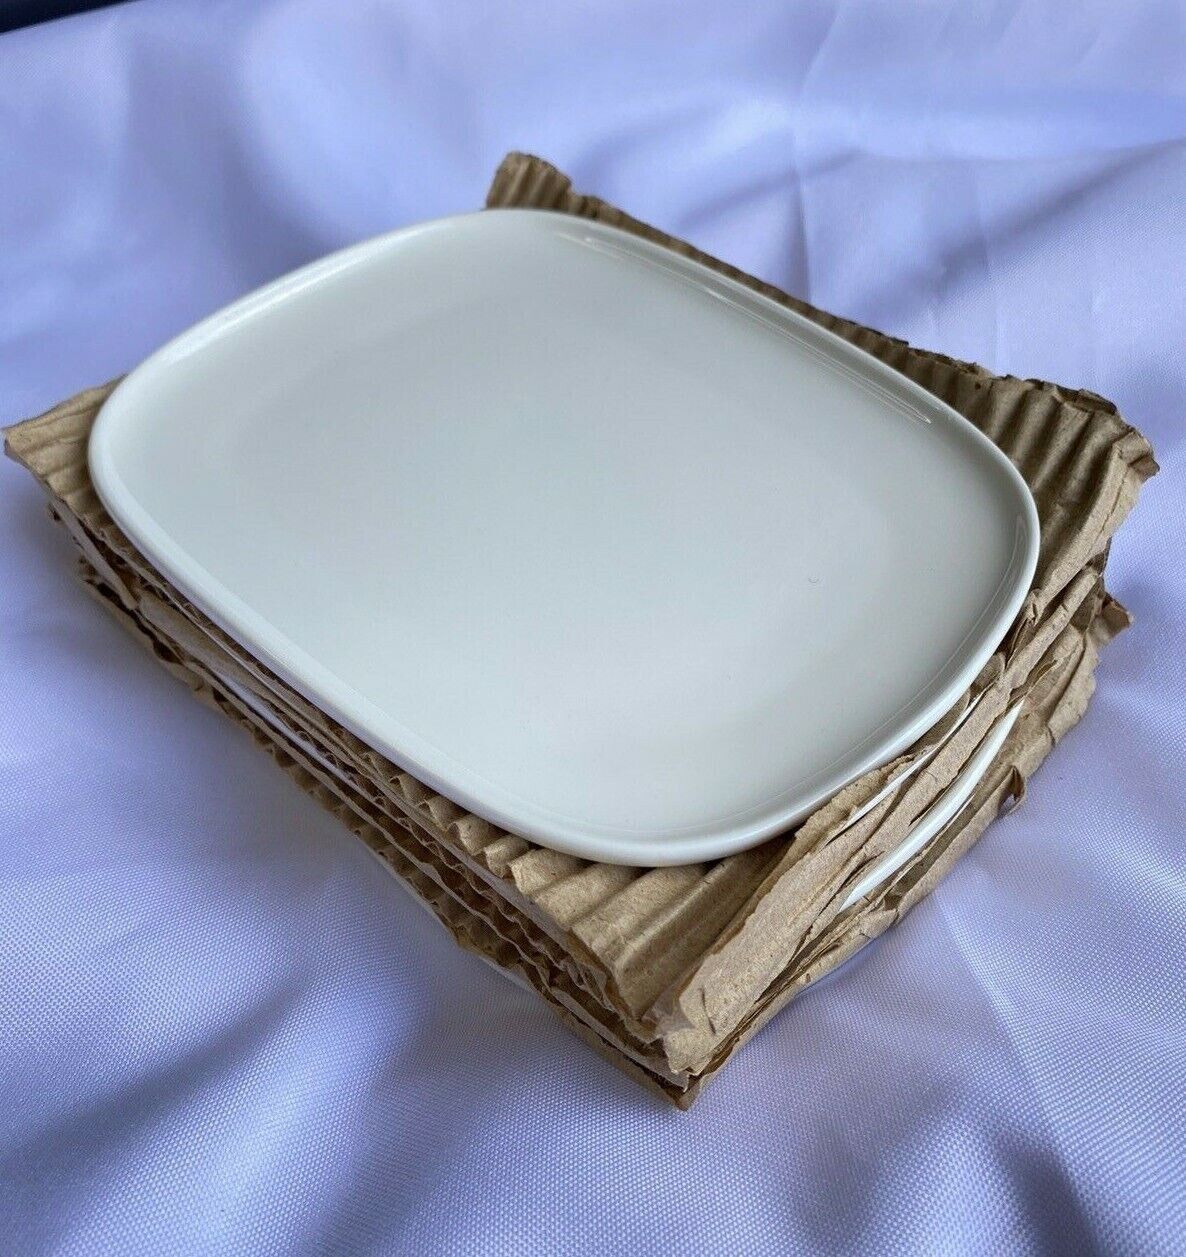 ALESSI white porcelain plates Italy for Delta Airlines minimalistic lot of 6